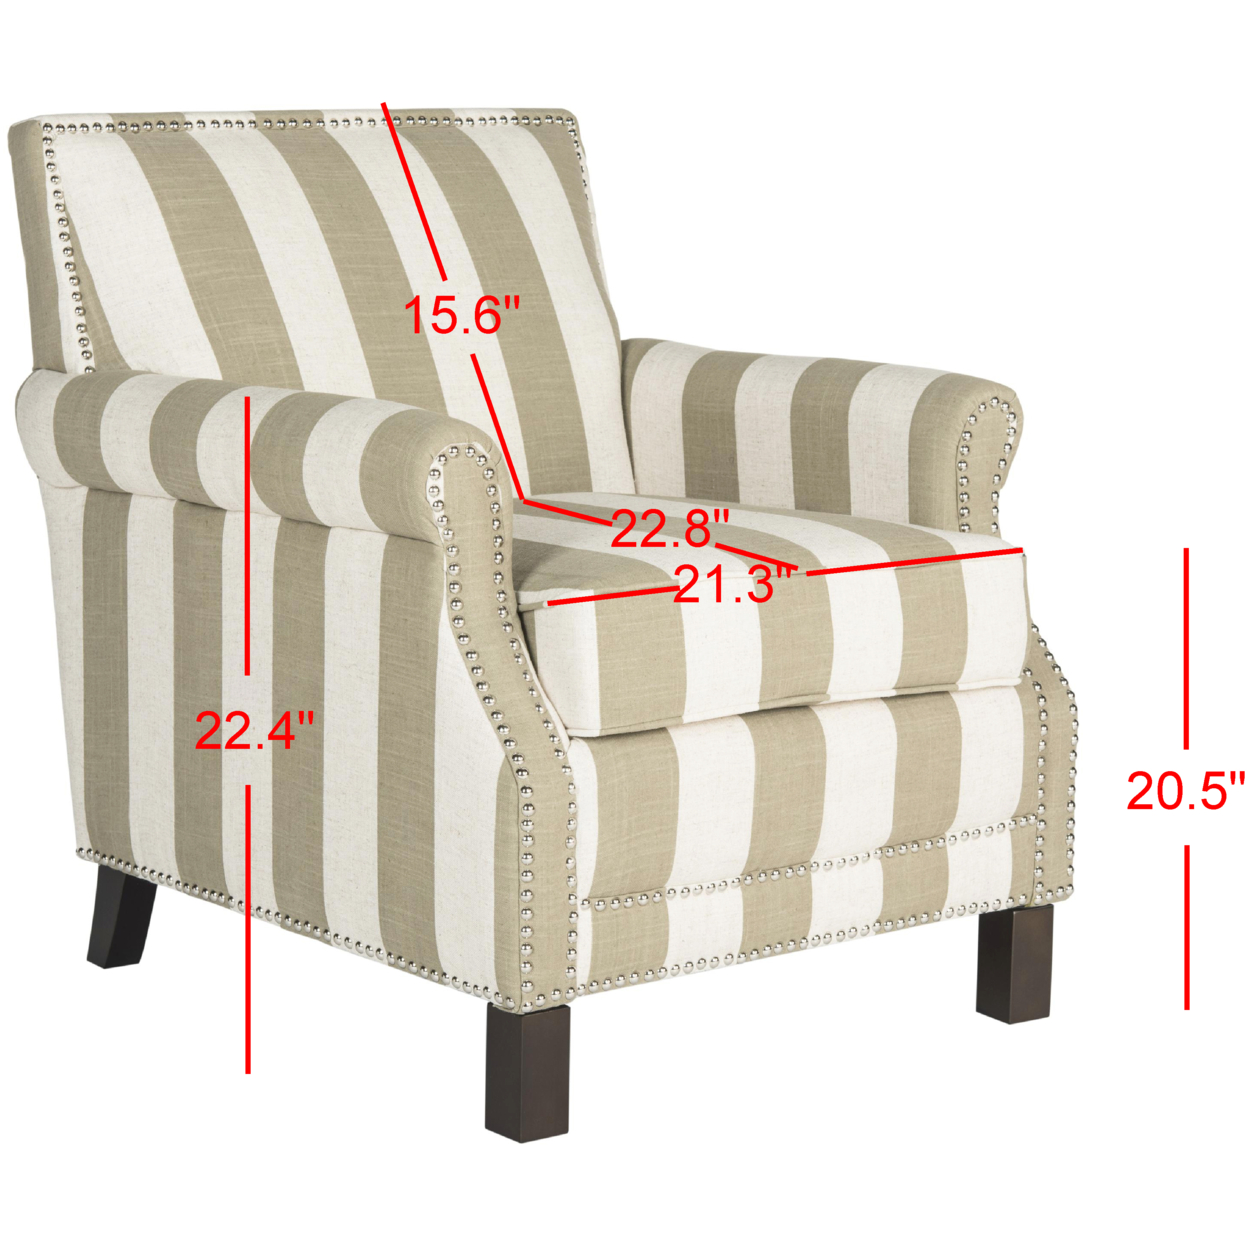 SAFAVIEH Easton Rustic Glam Upholstered Club Chair w/ Nailheads, Olive/White - image 5 of 7